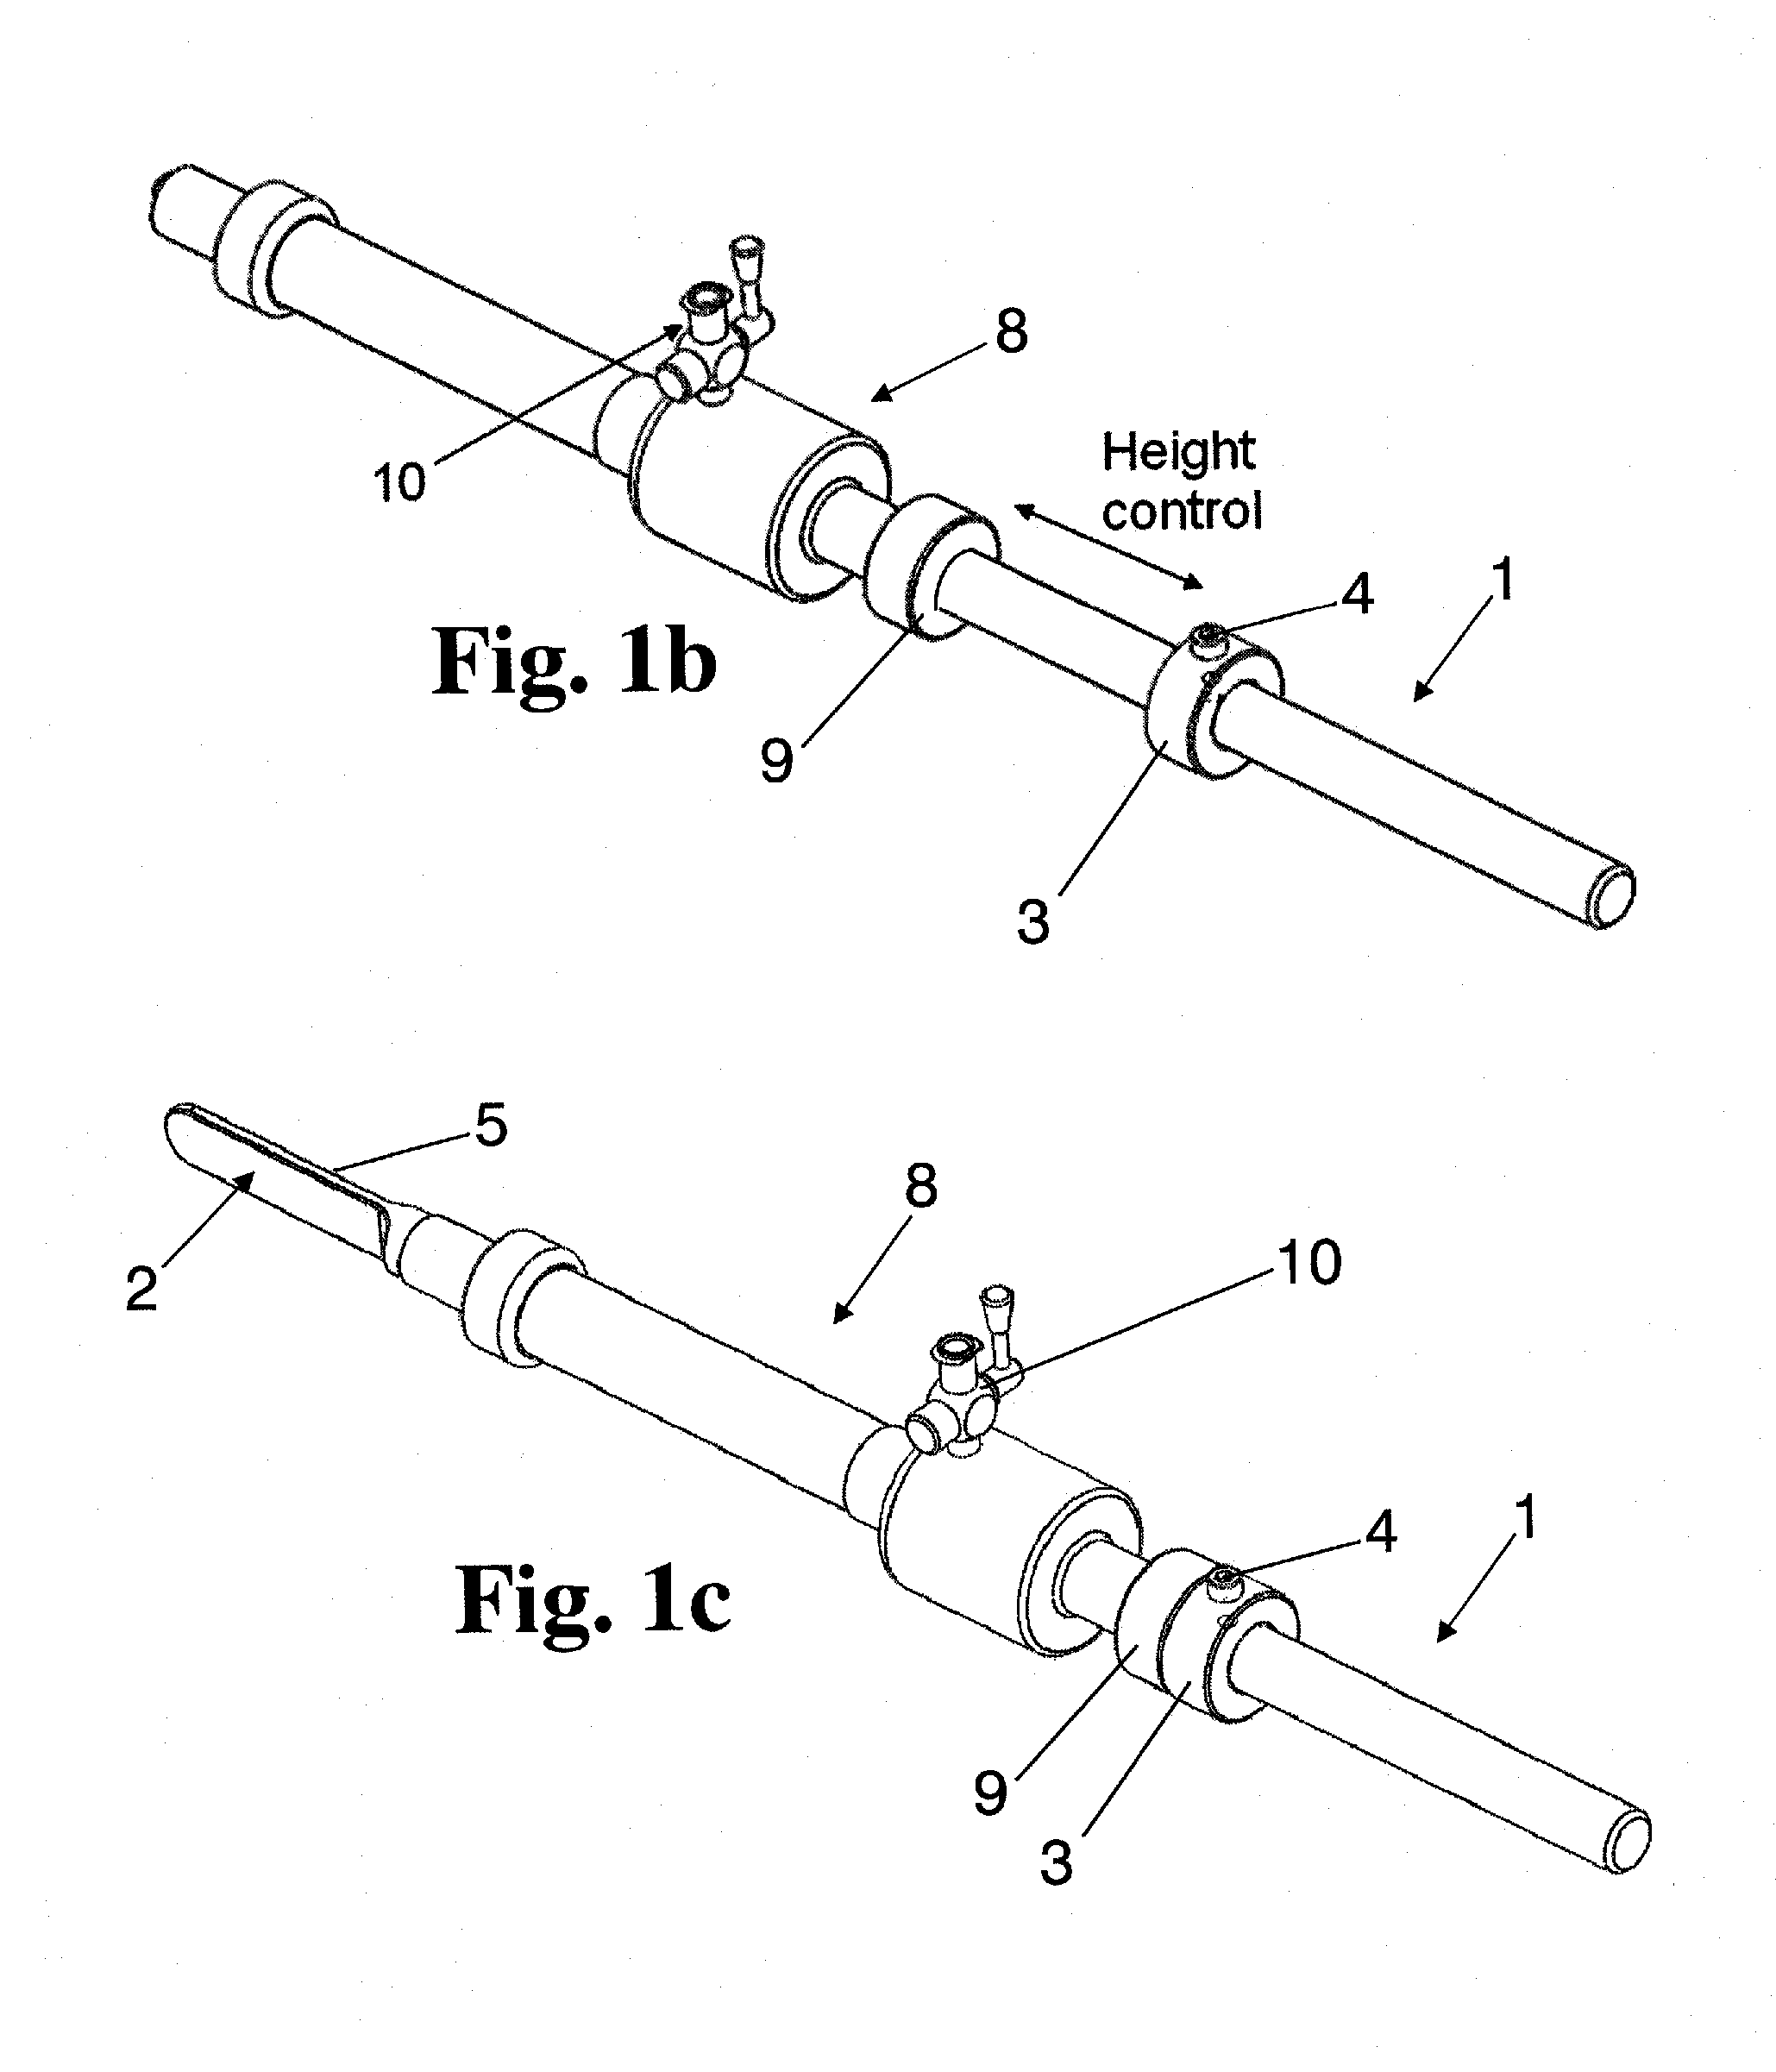 System and method for assisting the positioning of medical instruments